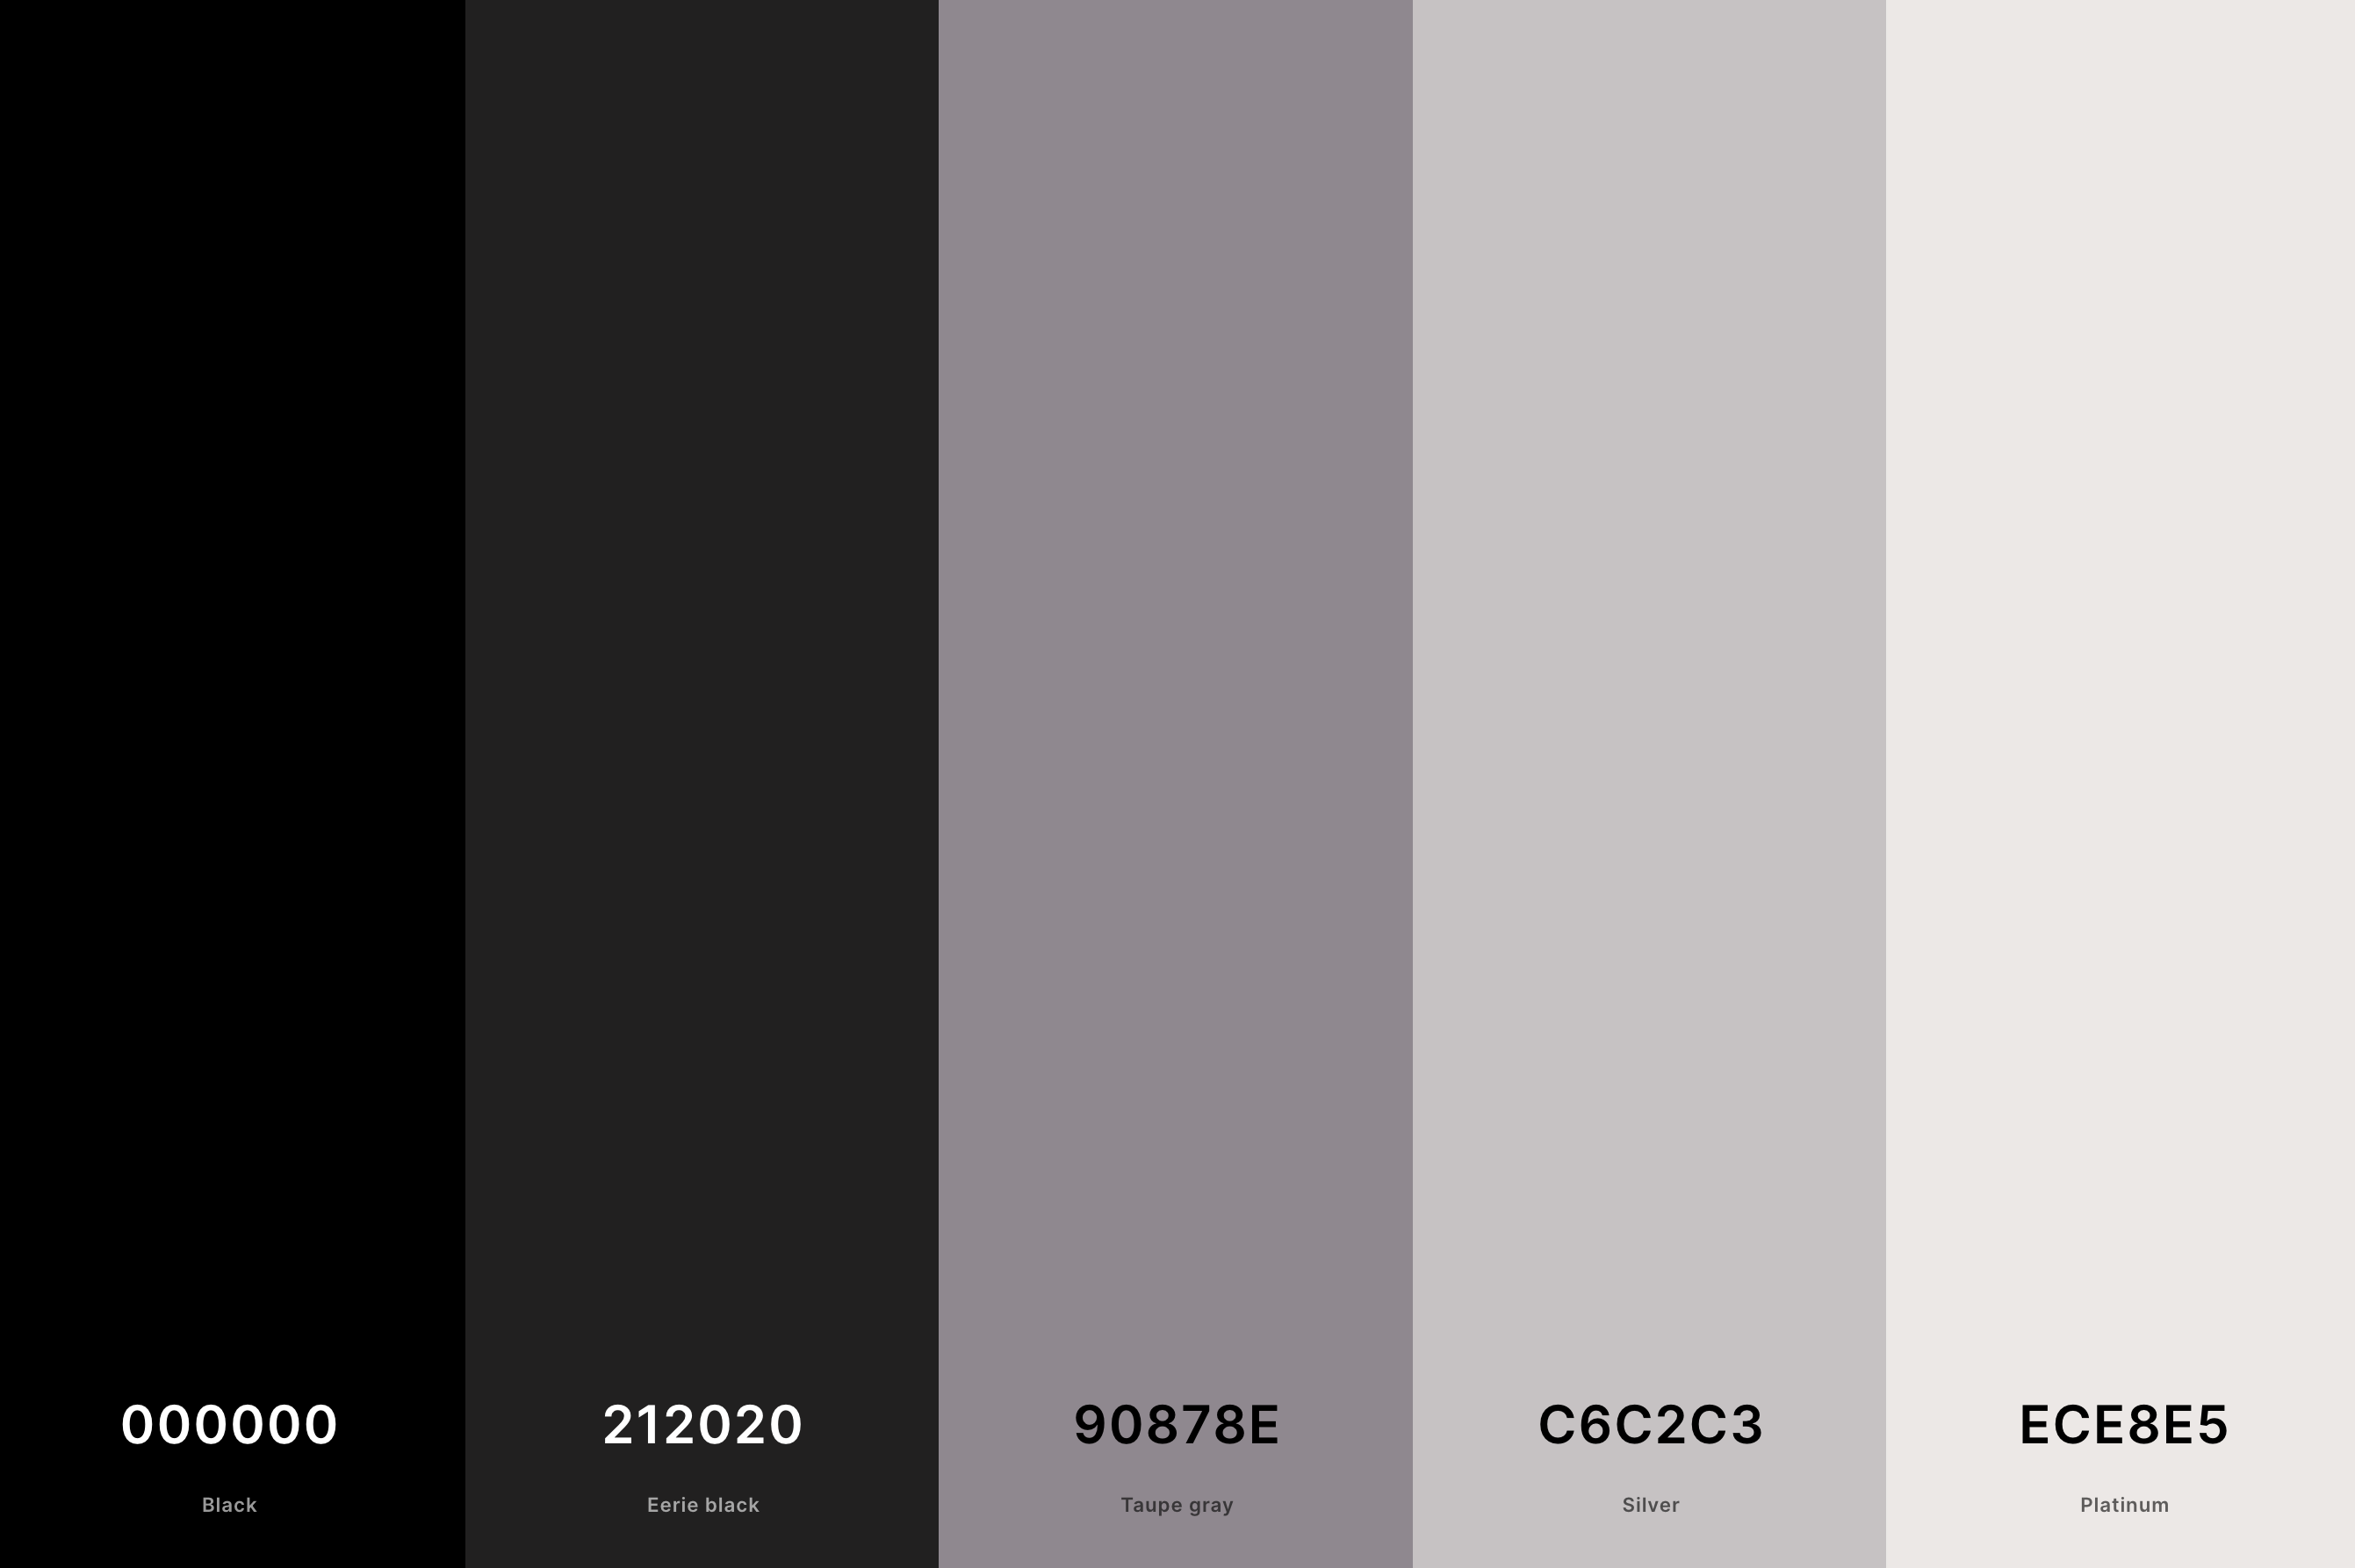 17. Black Aesthetic Color Palette Color Palette with Black (Hex #000000) + Eerie Black (Hex #212020) + Taupe Gray (Hex #90878E) + Silver (Hex #C6C2C3) + Platinum (Hex #ECE8E5) Color Palette with Hex Codes